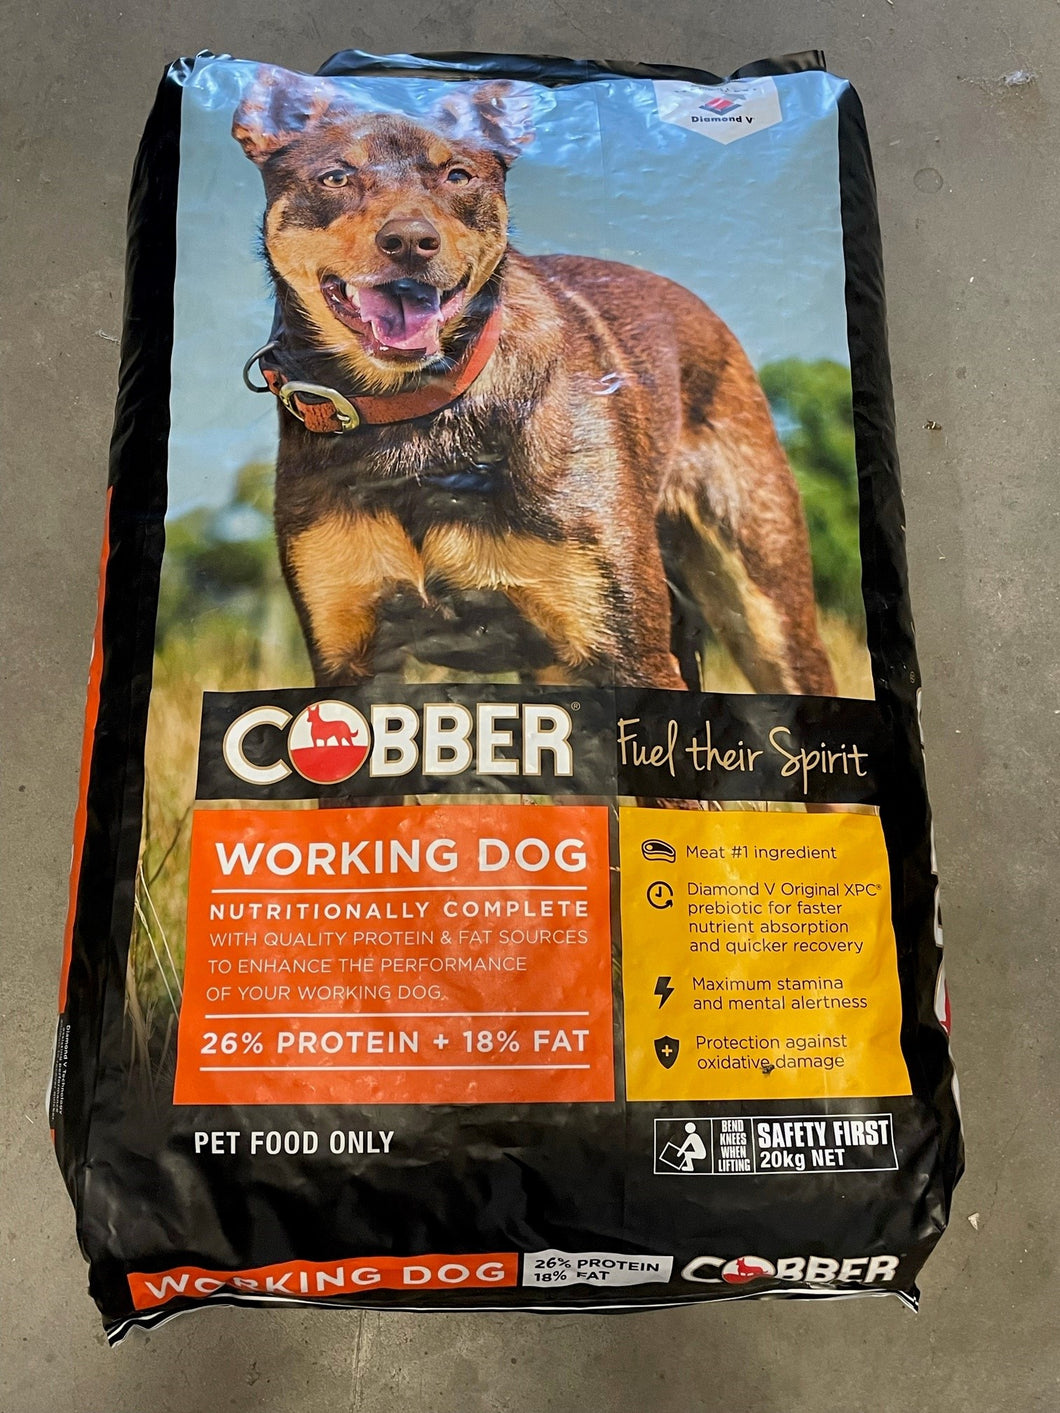 Cobber Working Dog Buy 2 and Save